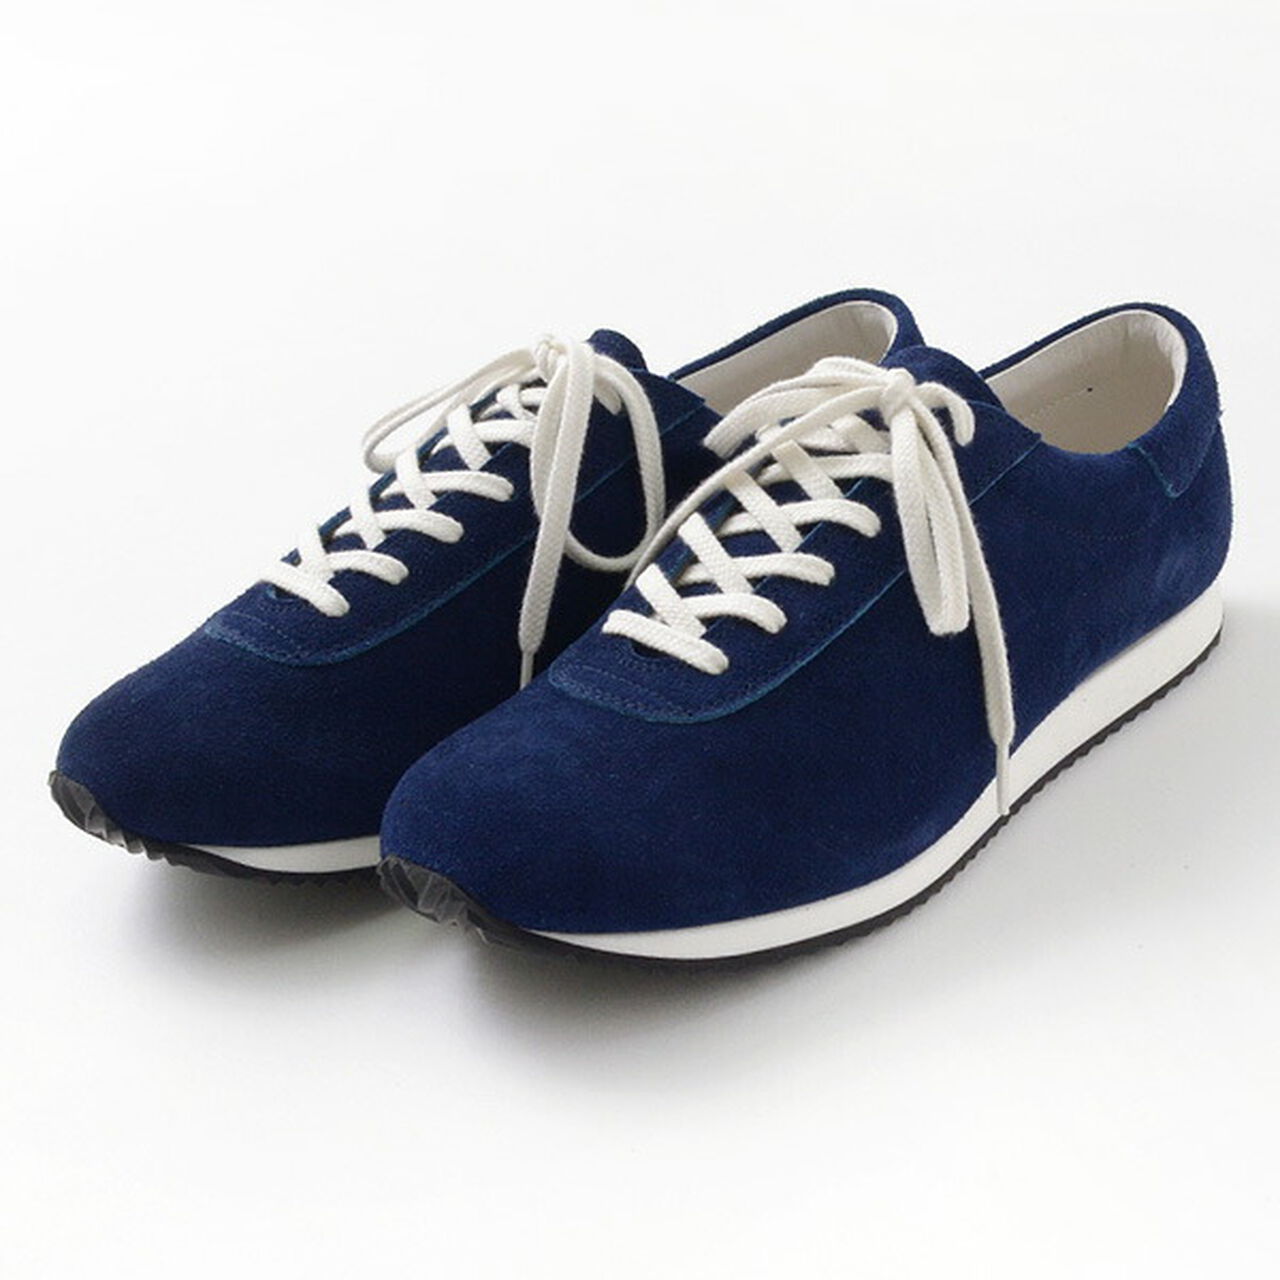 Suede Sneakers MIKEY,Navy, large image number 0